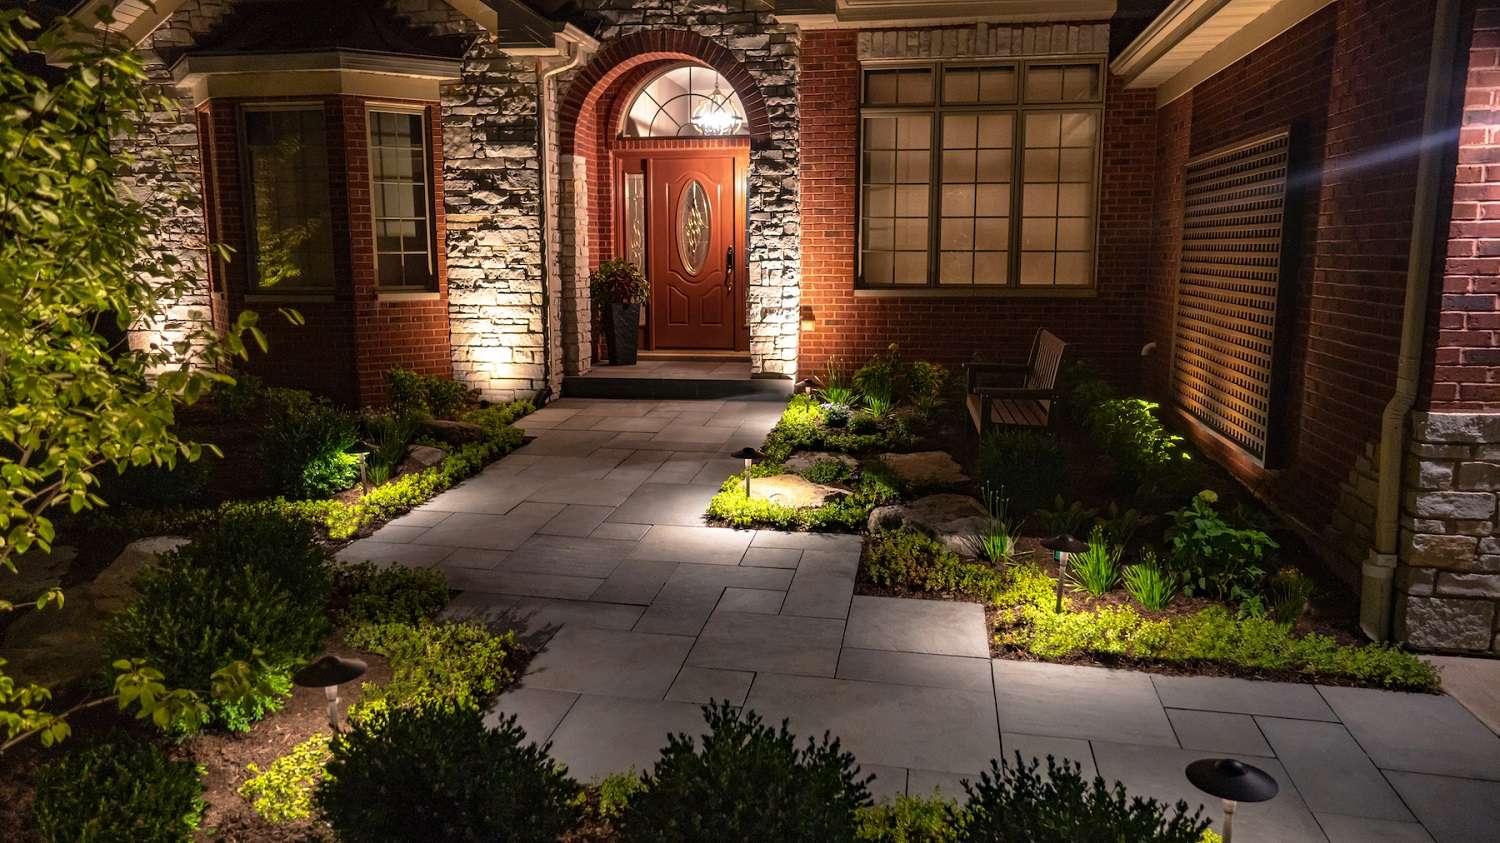 4 Landscape Lighting Ideas For the Front of Your House